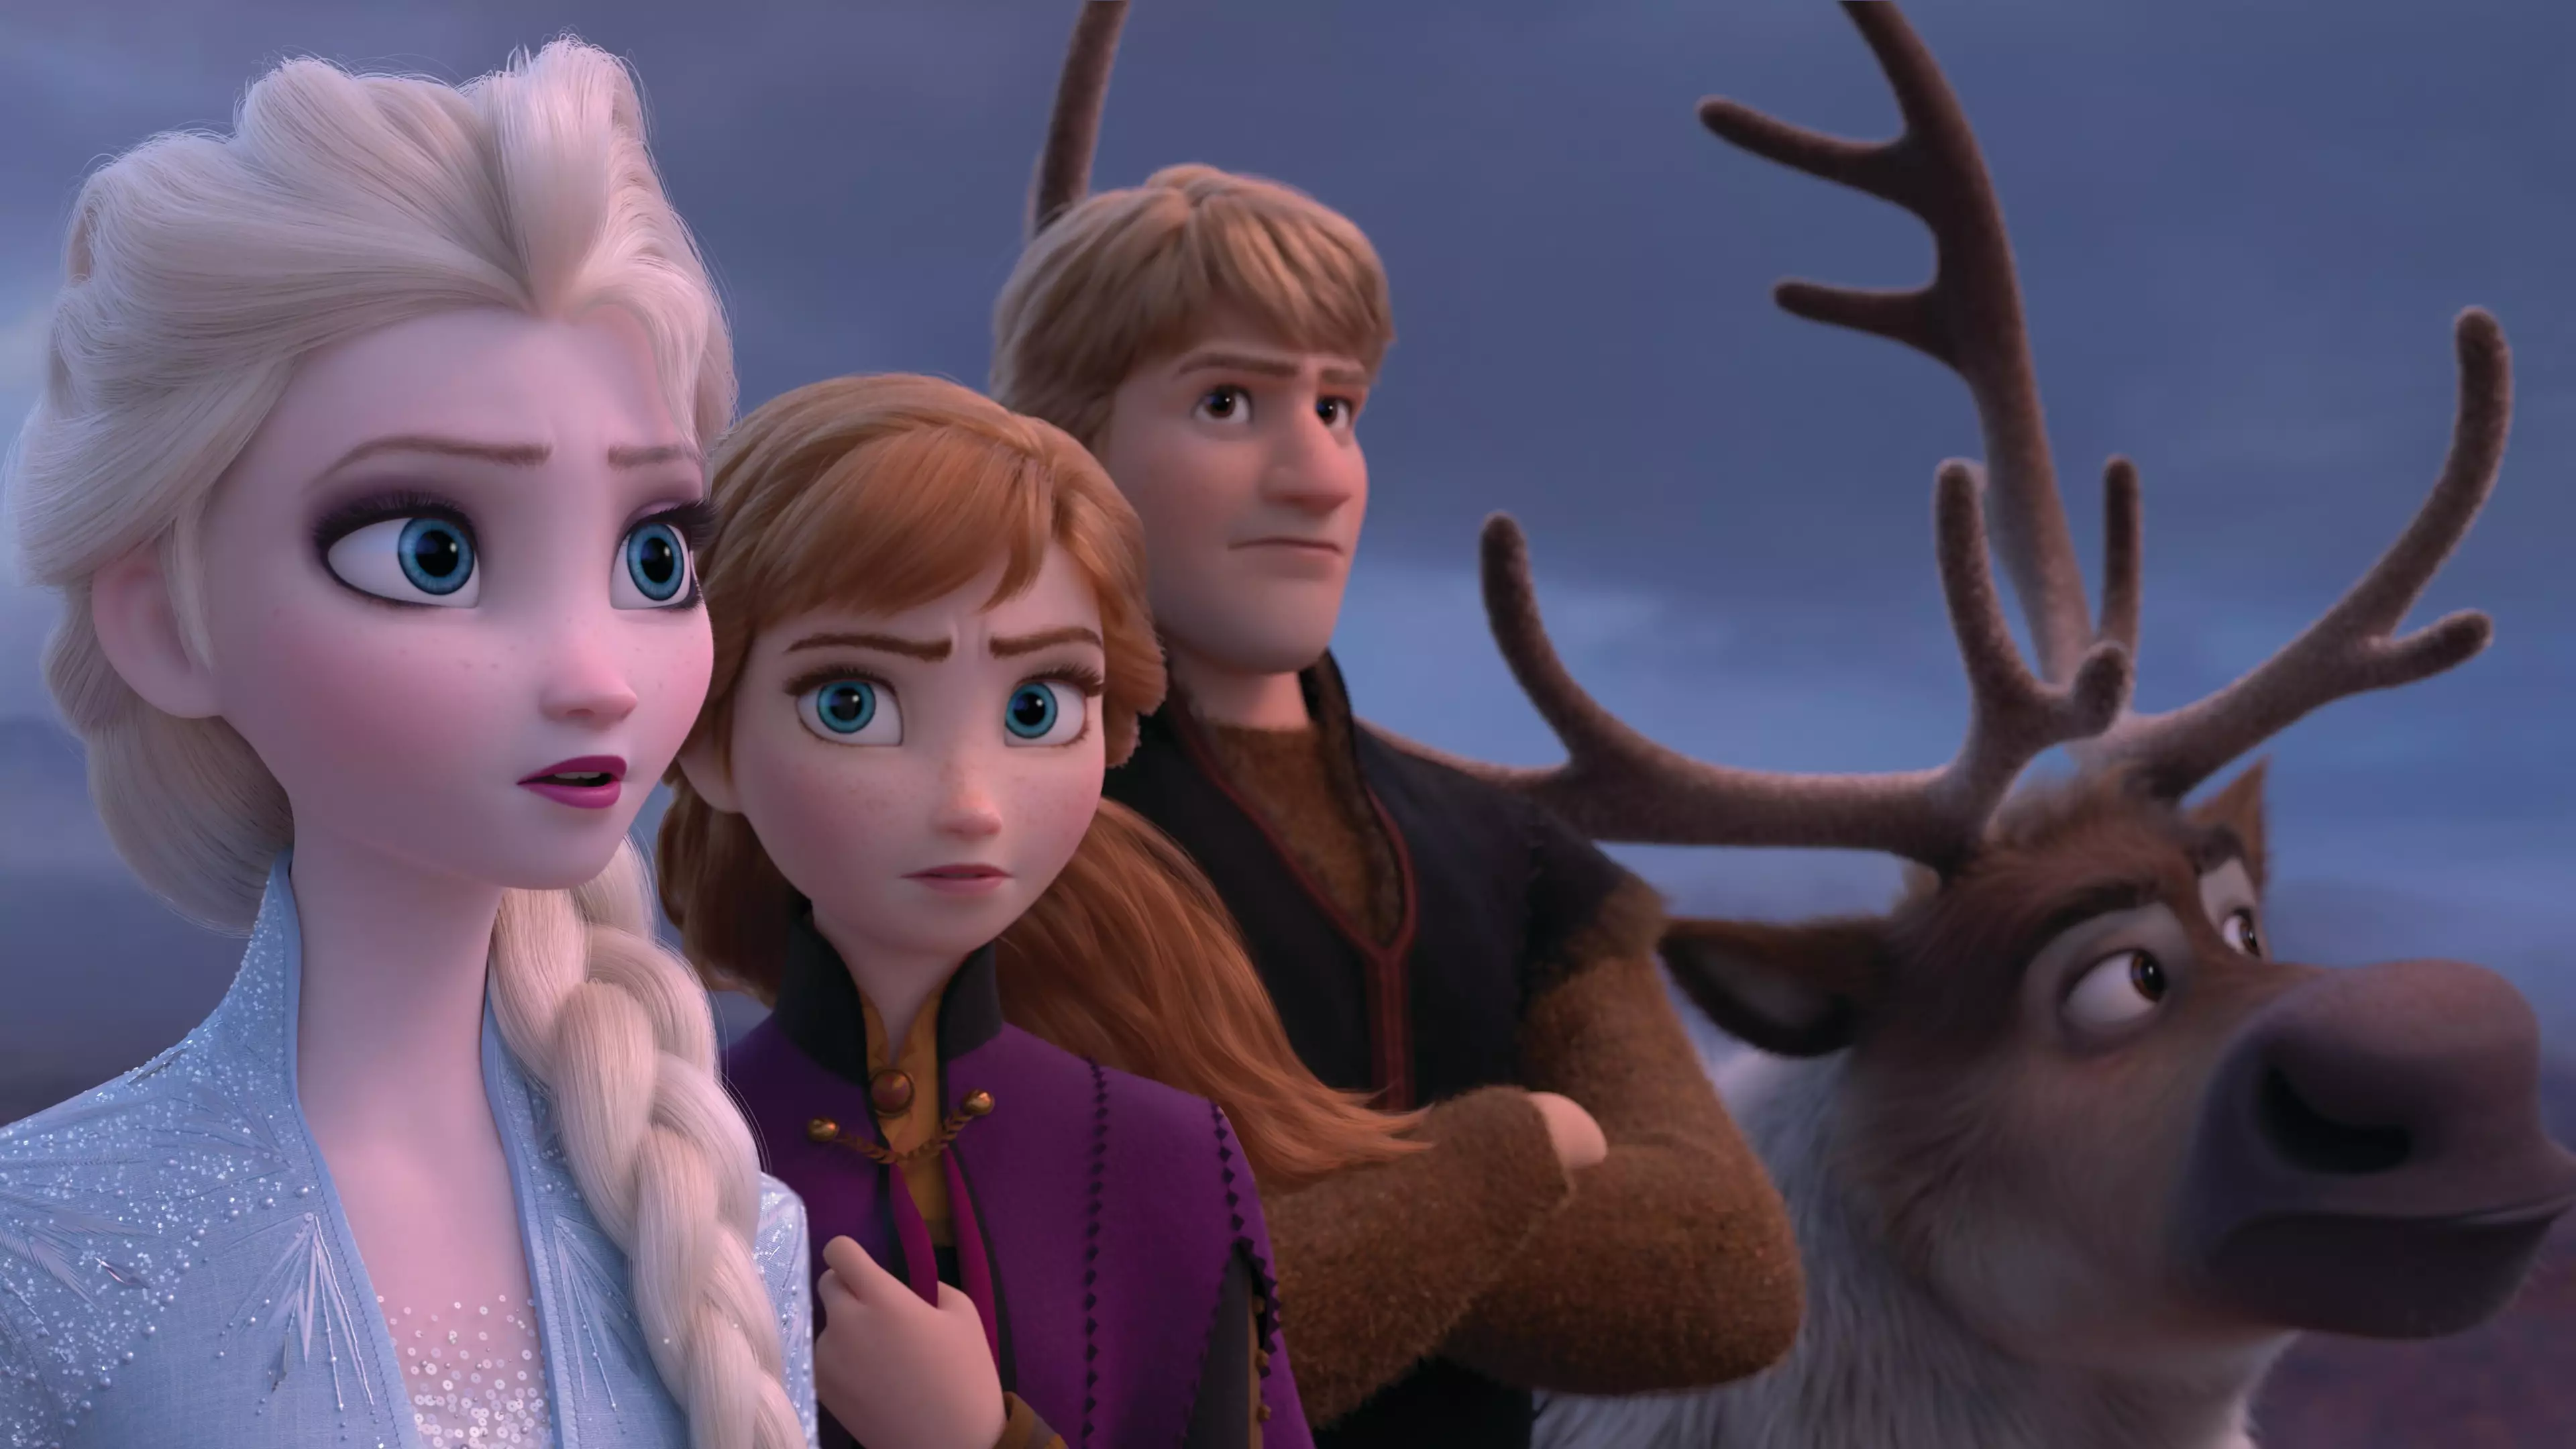 The Trailer for 'Frozen 2' Has Just Dropped And Now We Can’t Wait For November